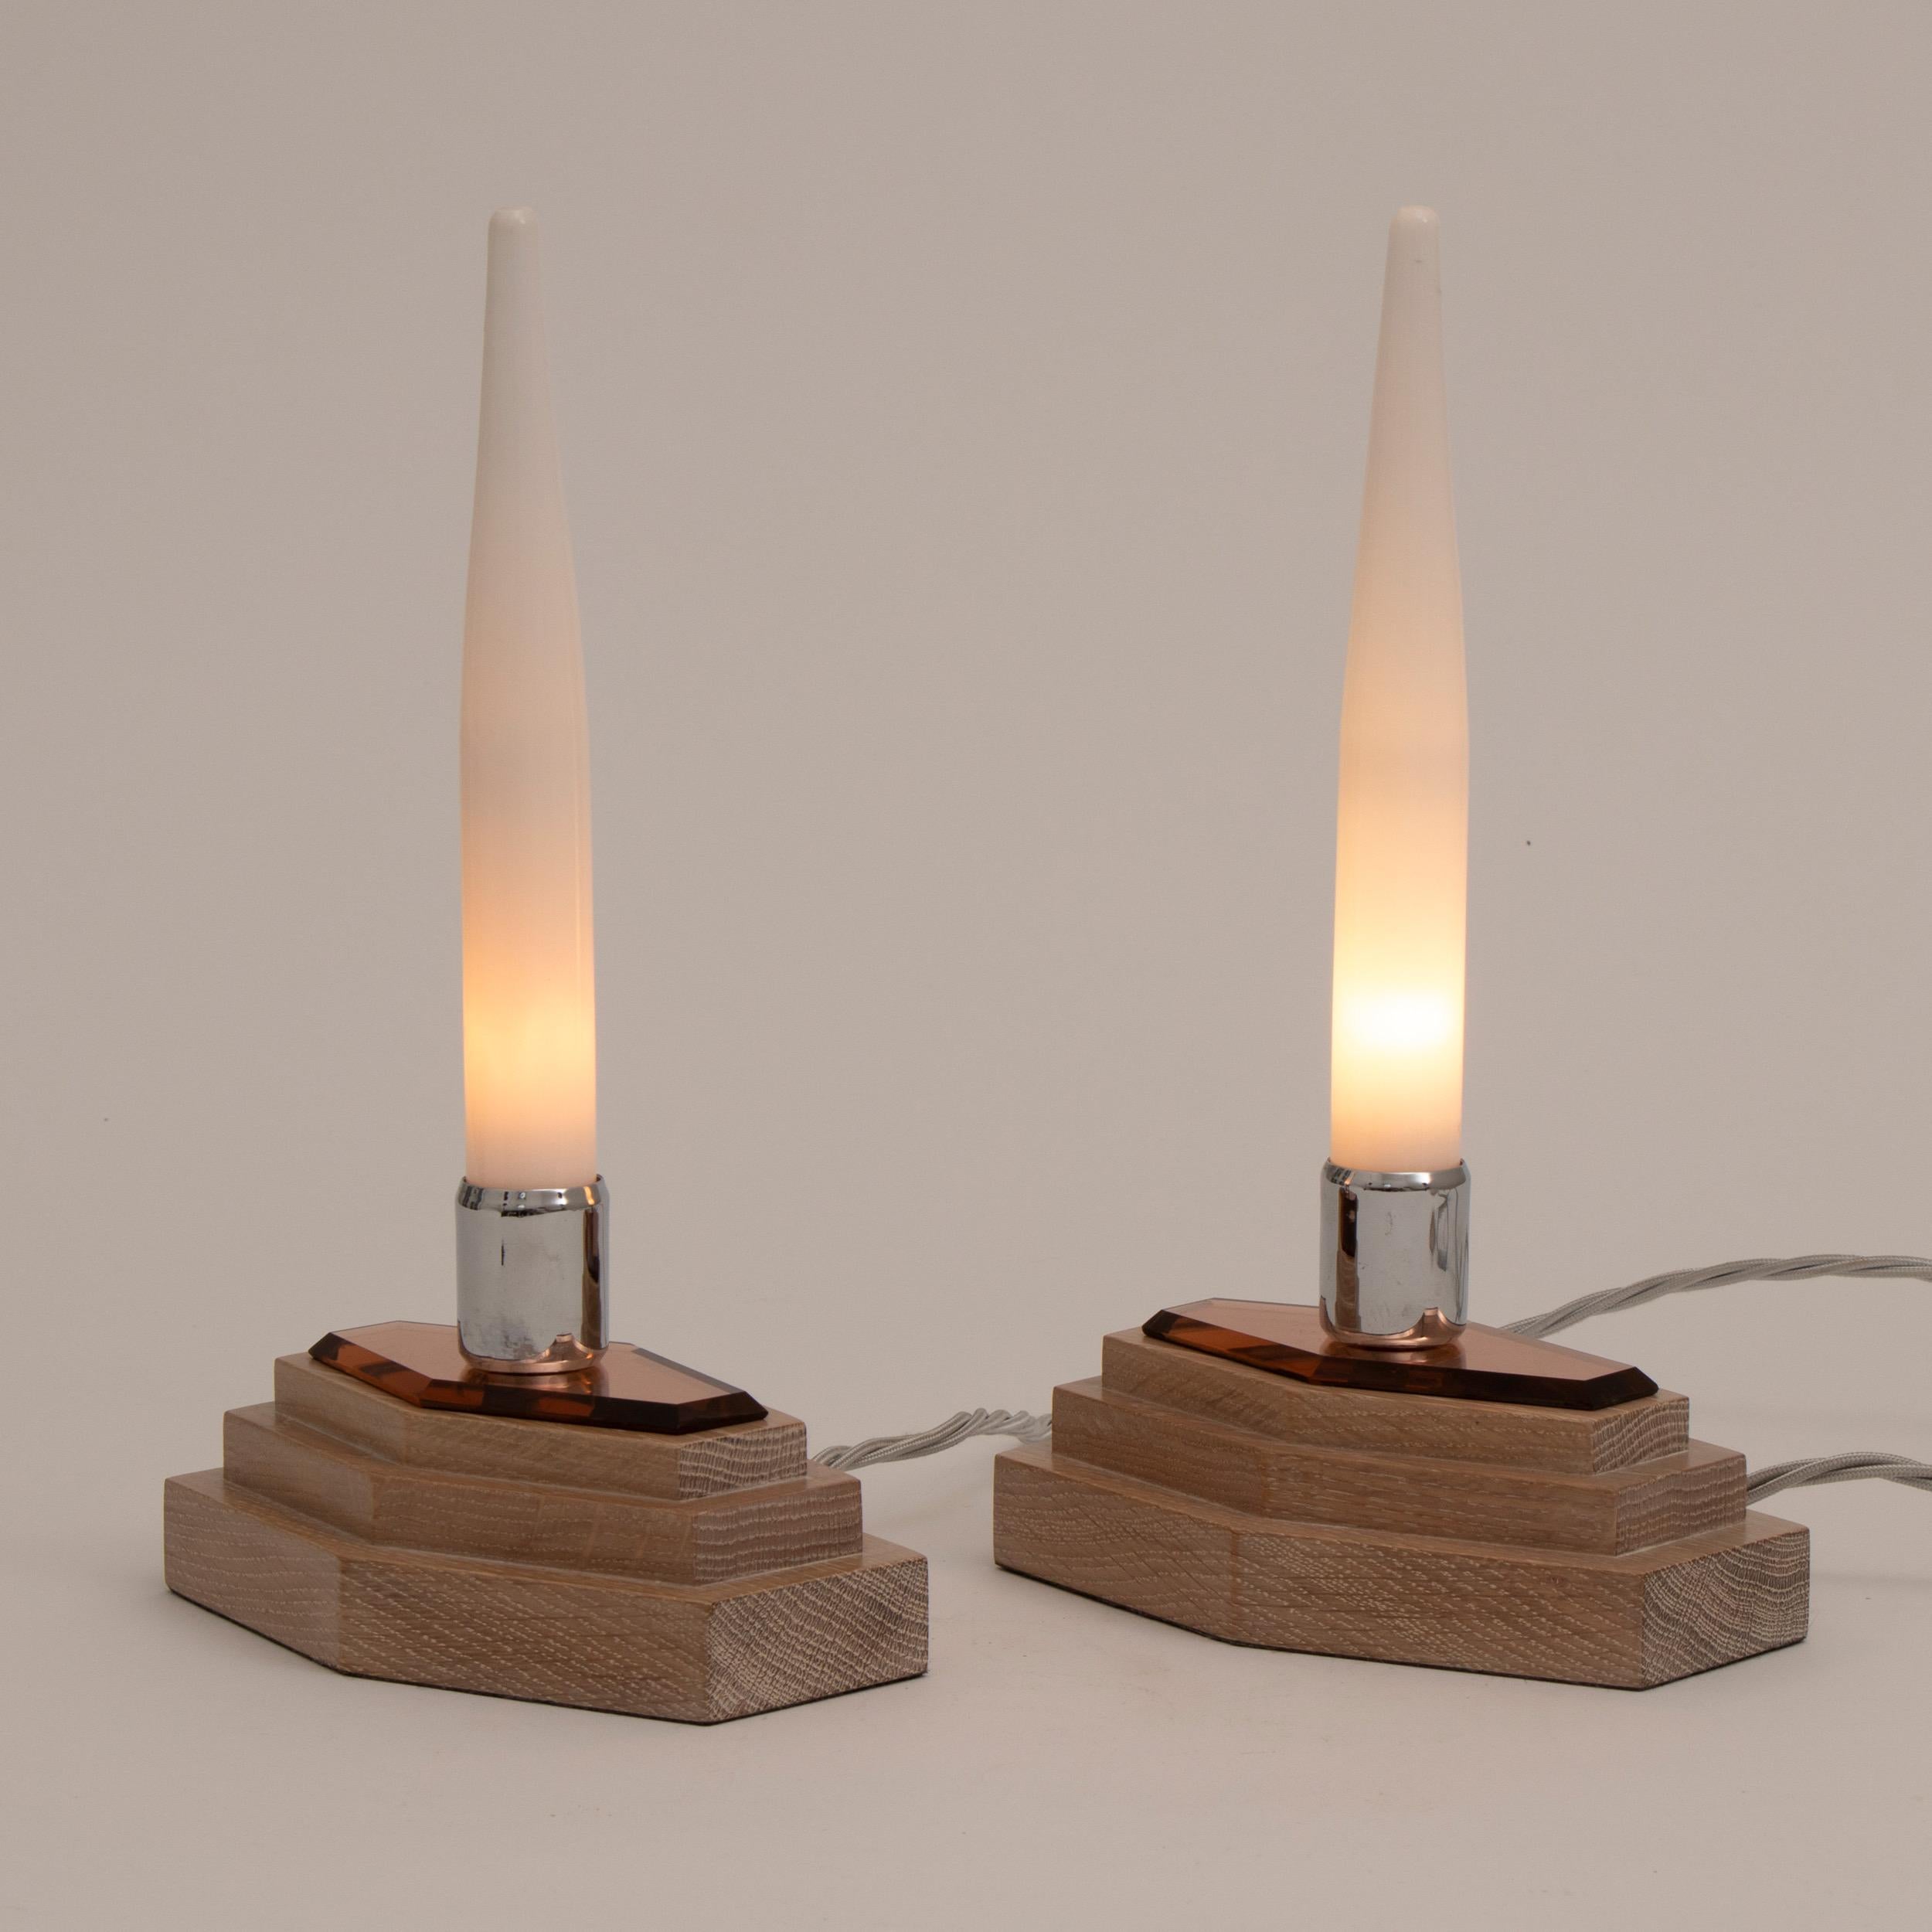 A smart pair of modernist Art Deco candle lights on stepped polished limed oak base with beveled peach mirror glass tops. Topped with a candle shaped opal glass shade with a chrome sconce by Heals Tottenham court road London, circa 1930.
Measures: